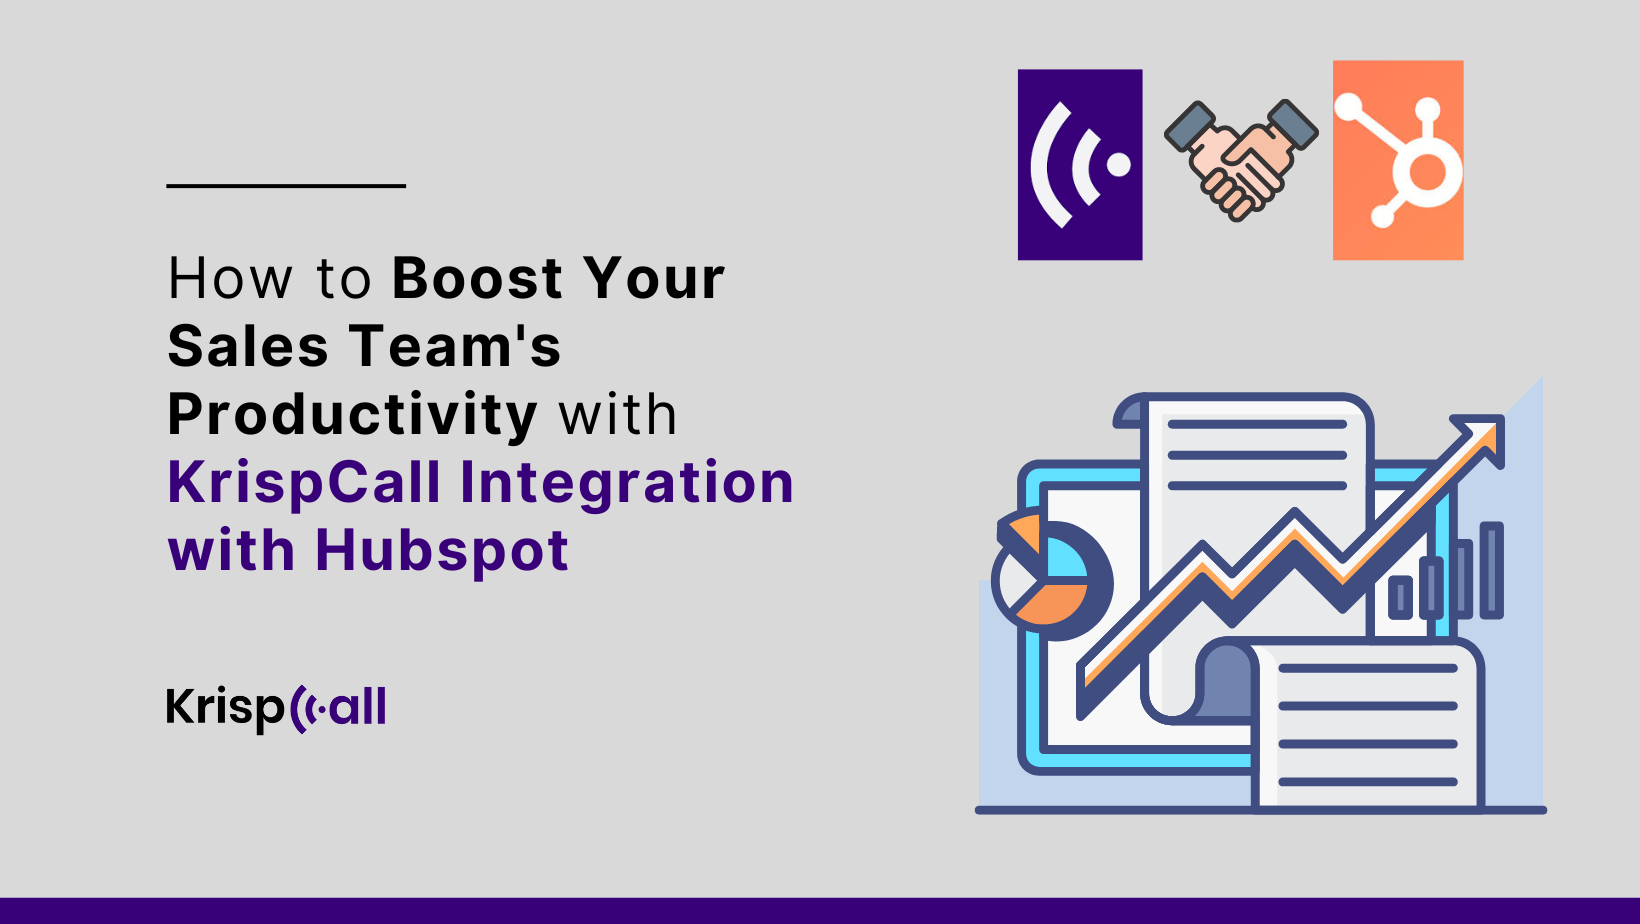 How to Boost Your Sales Team's Productivity with KrispCall Integration with Hubspot